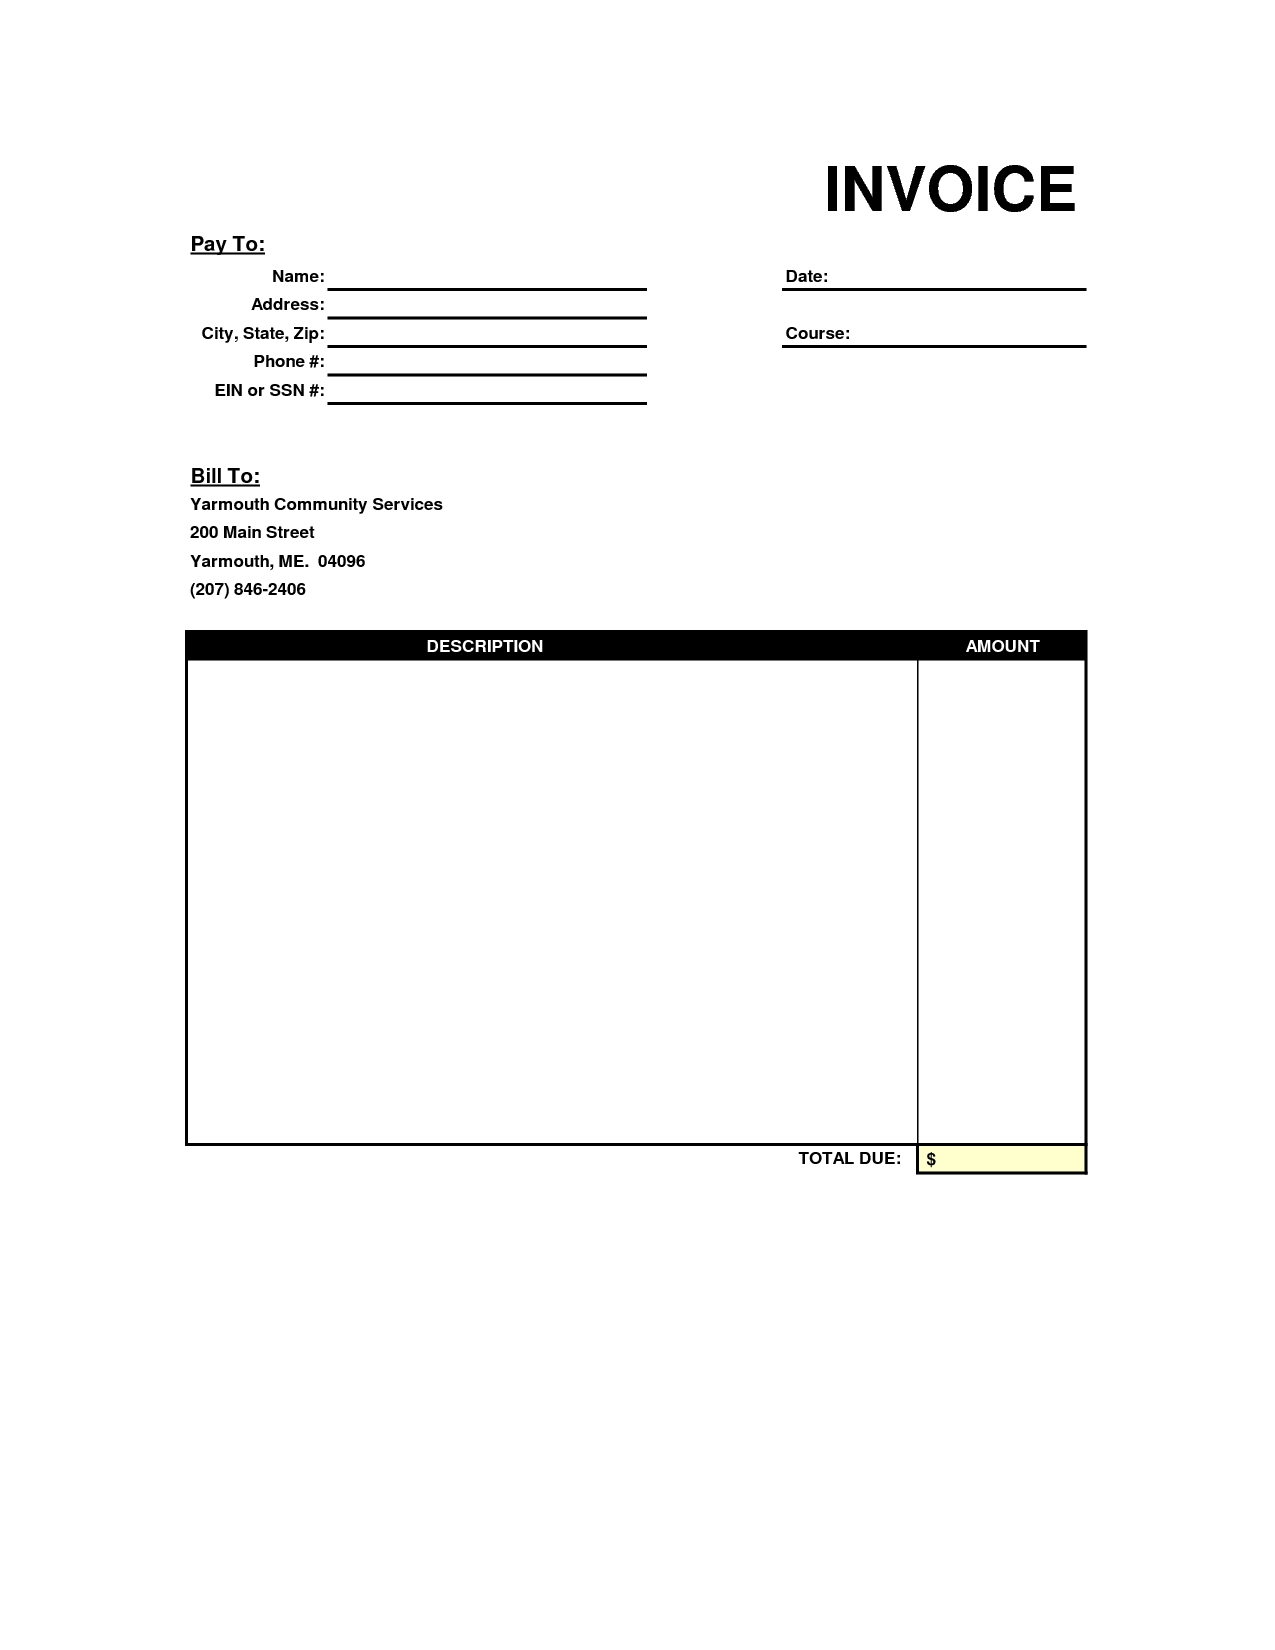 blank invoice template blank invoice free blank invoice templates